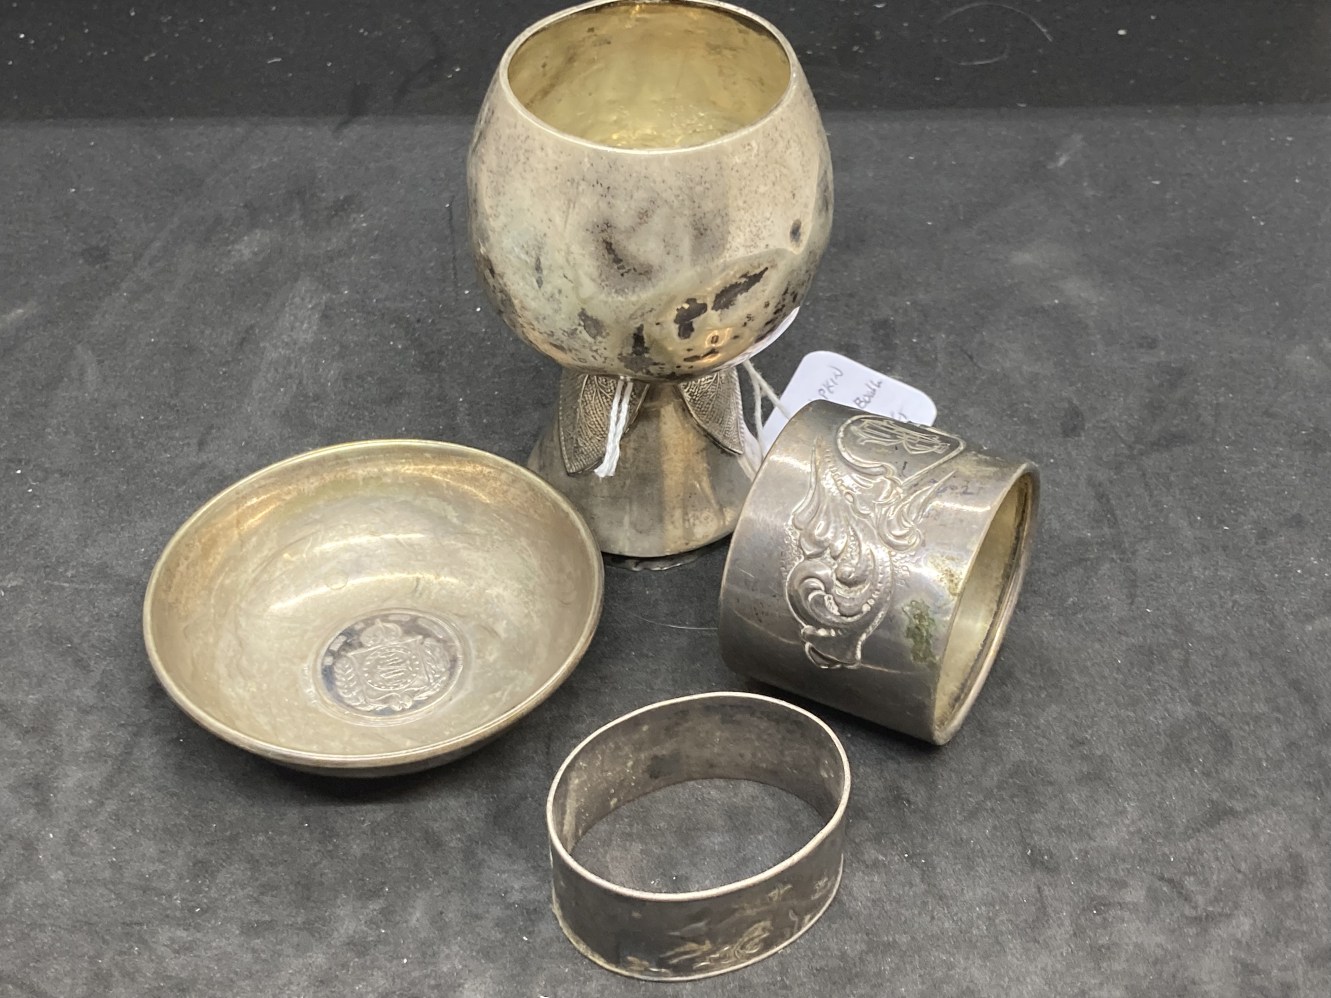 Scandinavian Silver: Two napkin rings, one supper bowl and one Christening cup. Total weight 4.7oz.